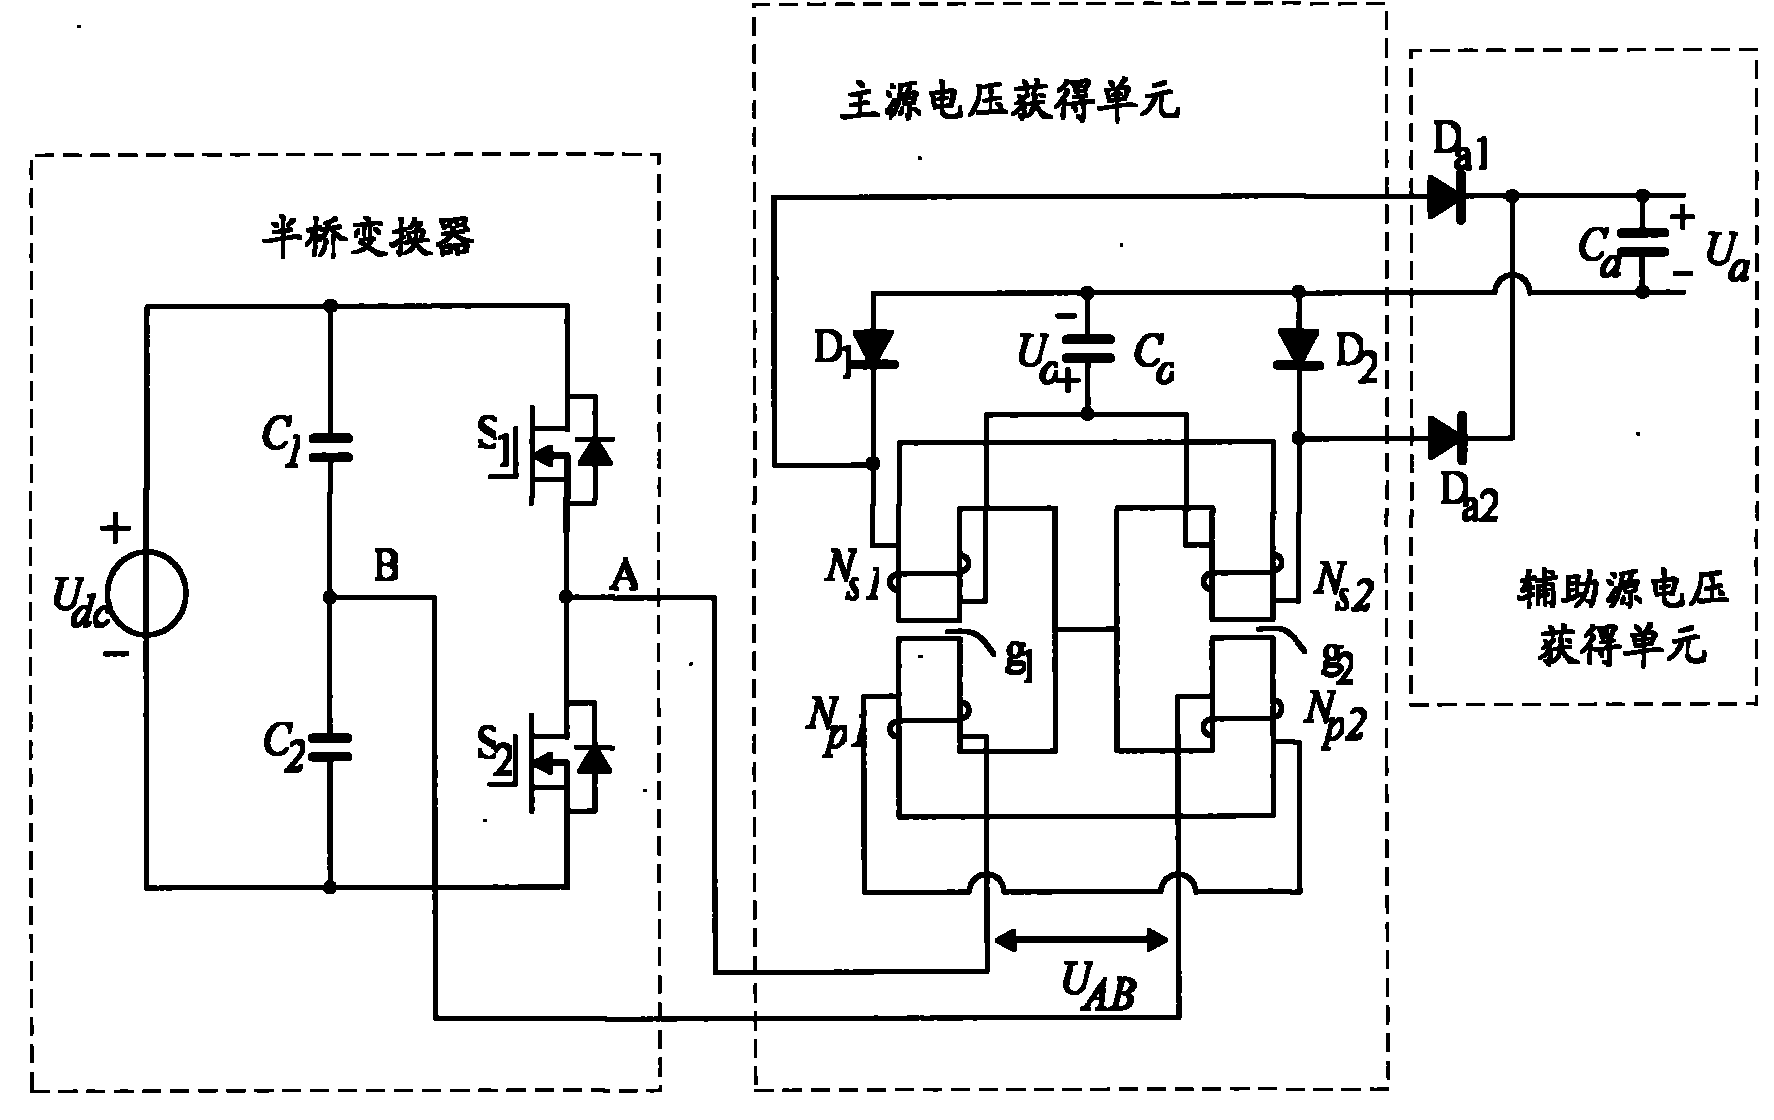 Magnetic integration transfer circuit system